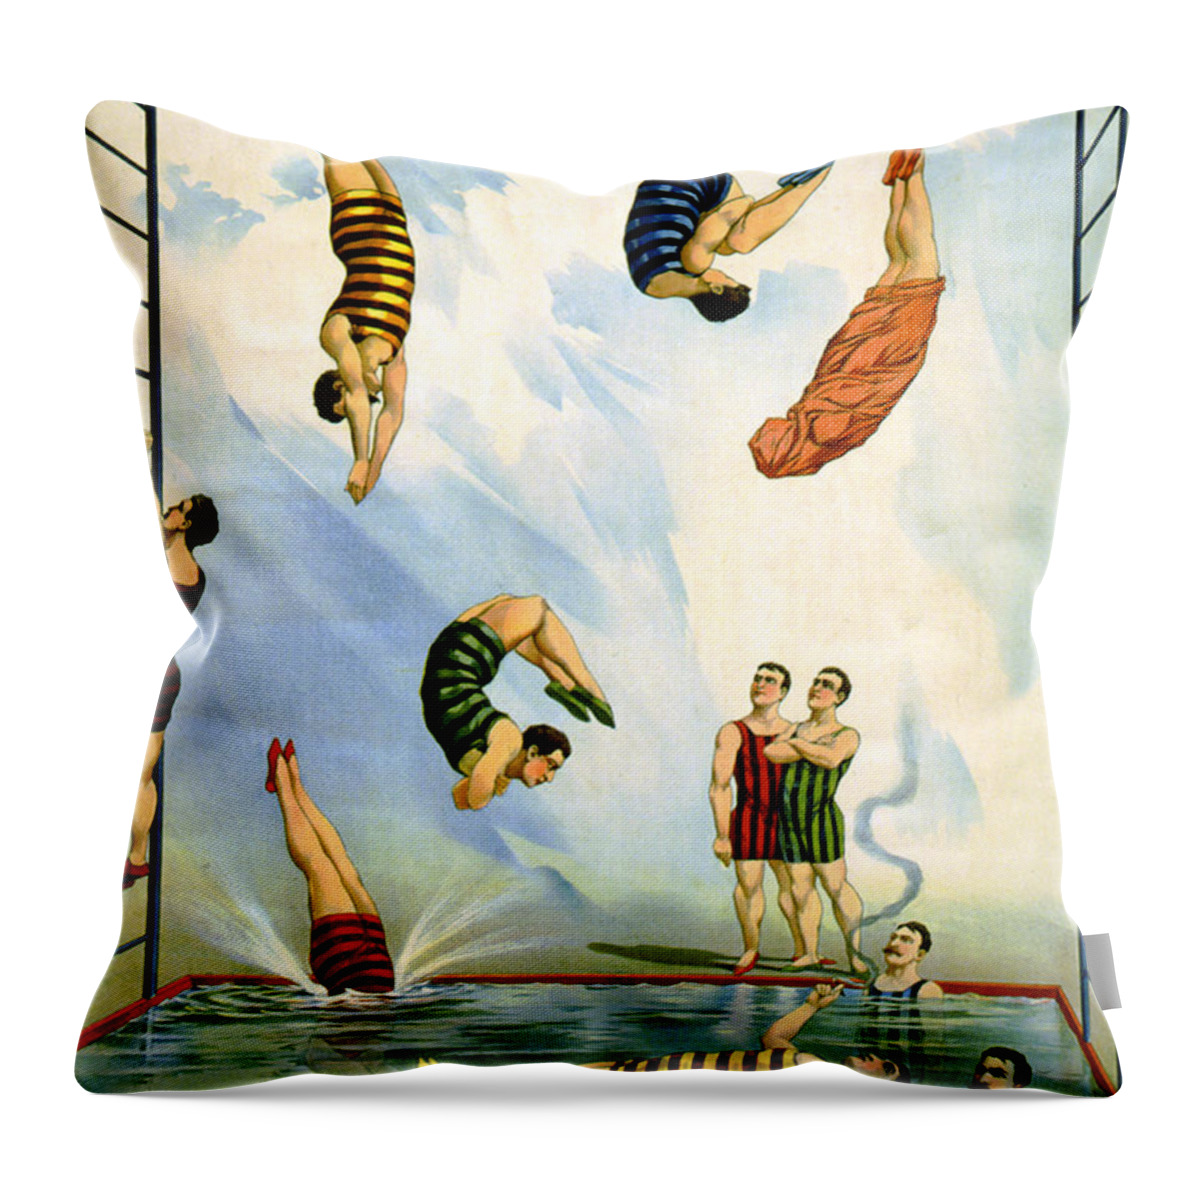 Entertainment Throw Pillow featuring the photograph Circus Diving Act, 1898 by Science Source